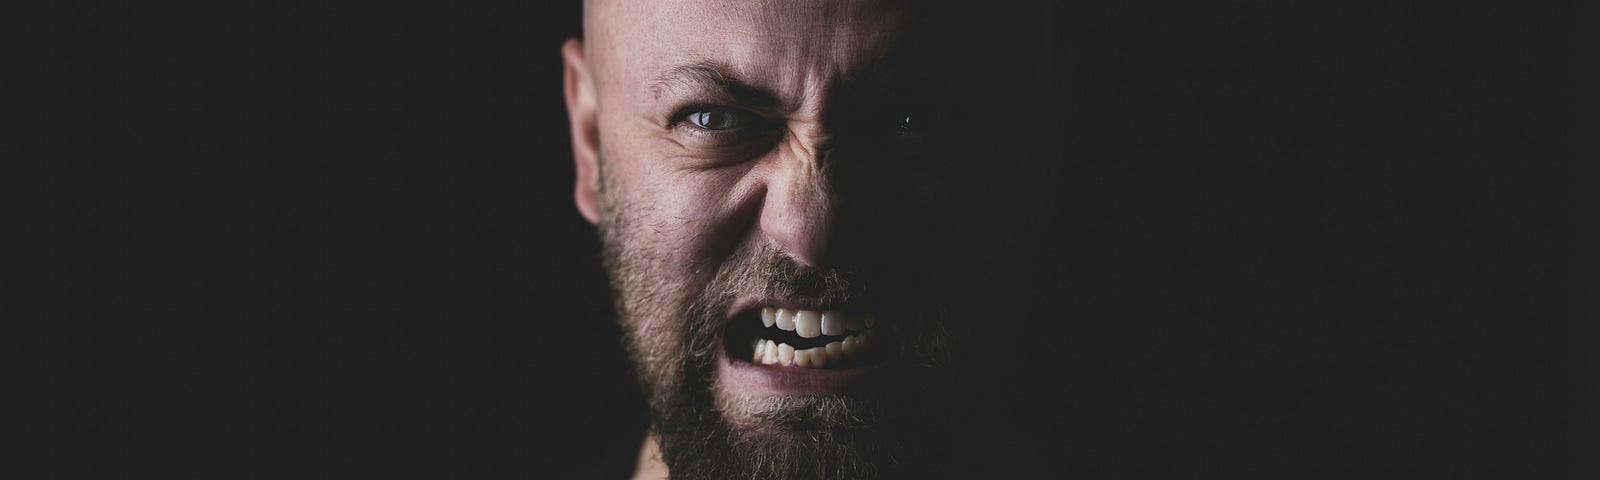 The face of an angry man, against a black background.